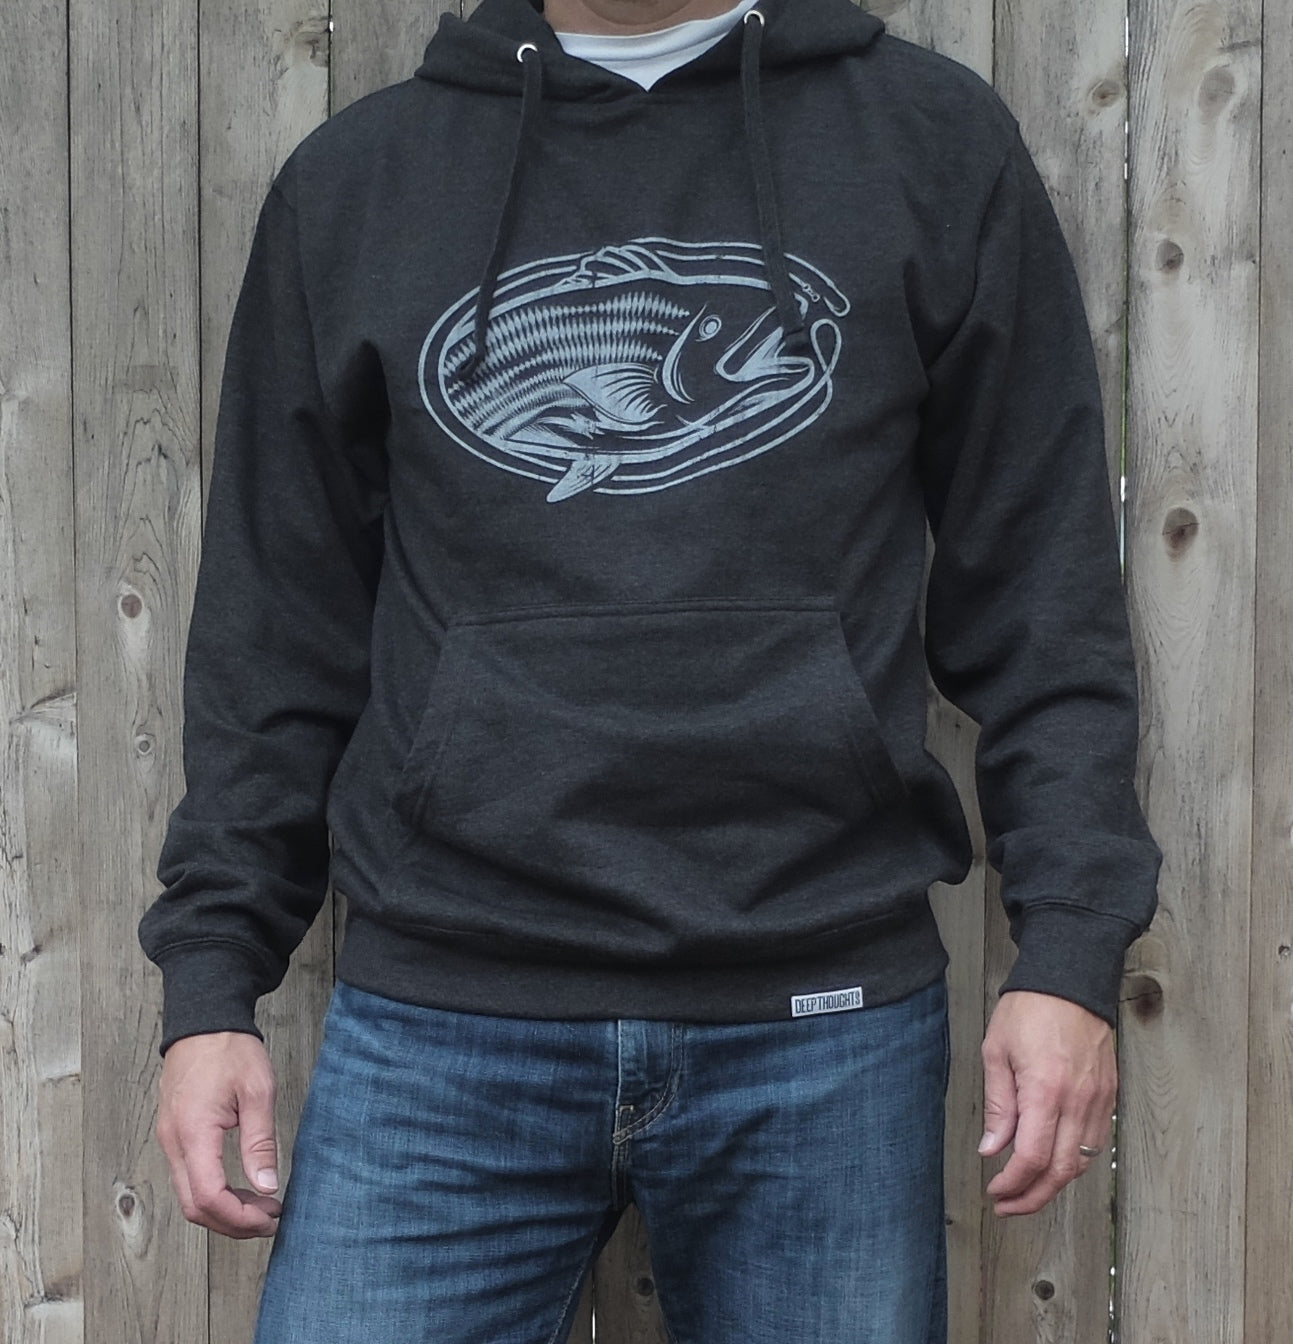 man wearing heather charcoal hoodie with white vintage style striped oval-shaped graphic